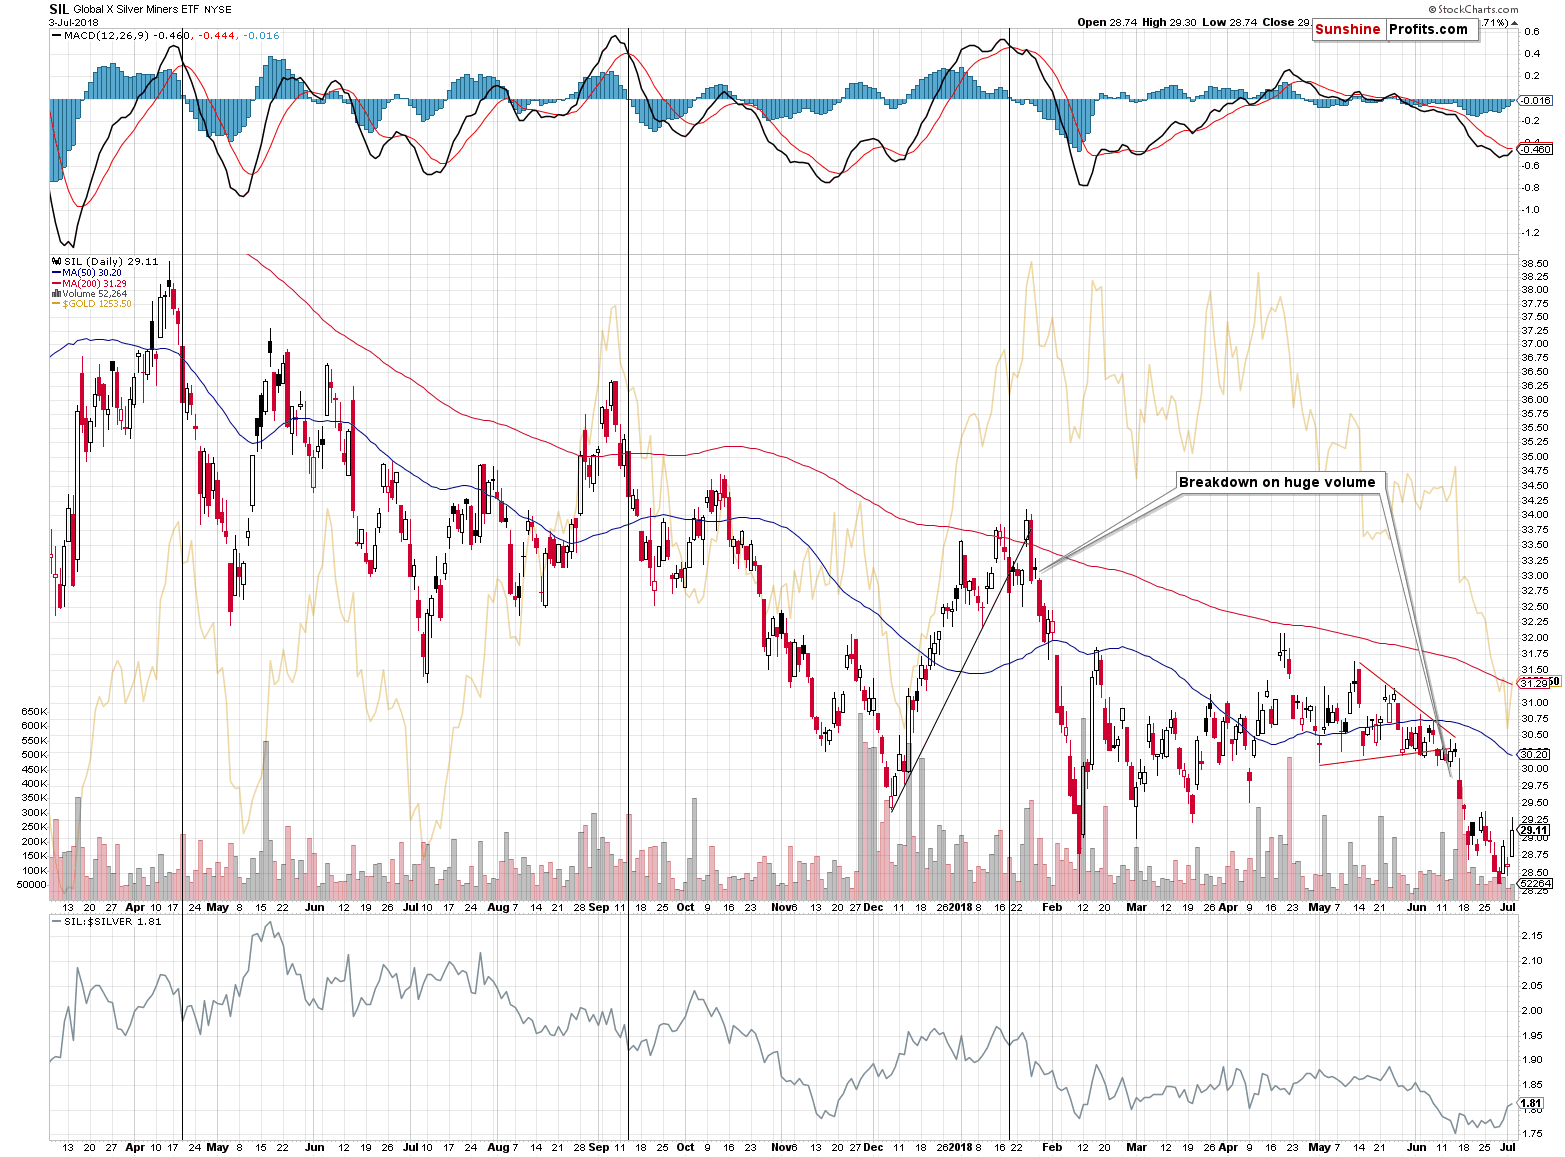 Global X Silver Miners ETF